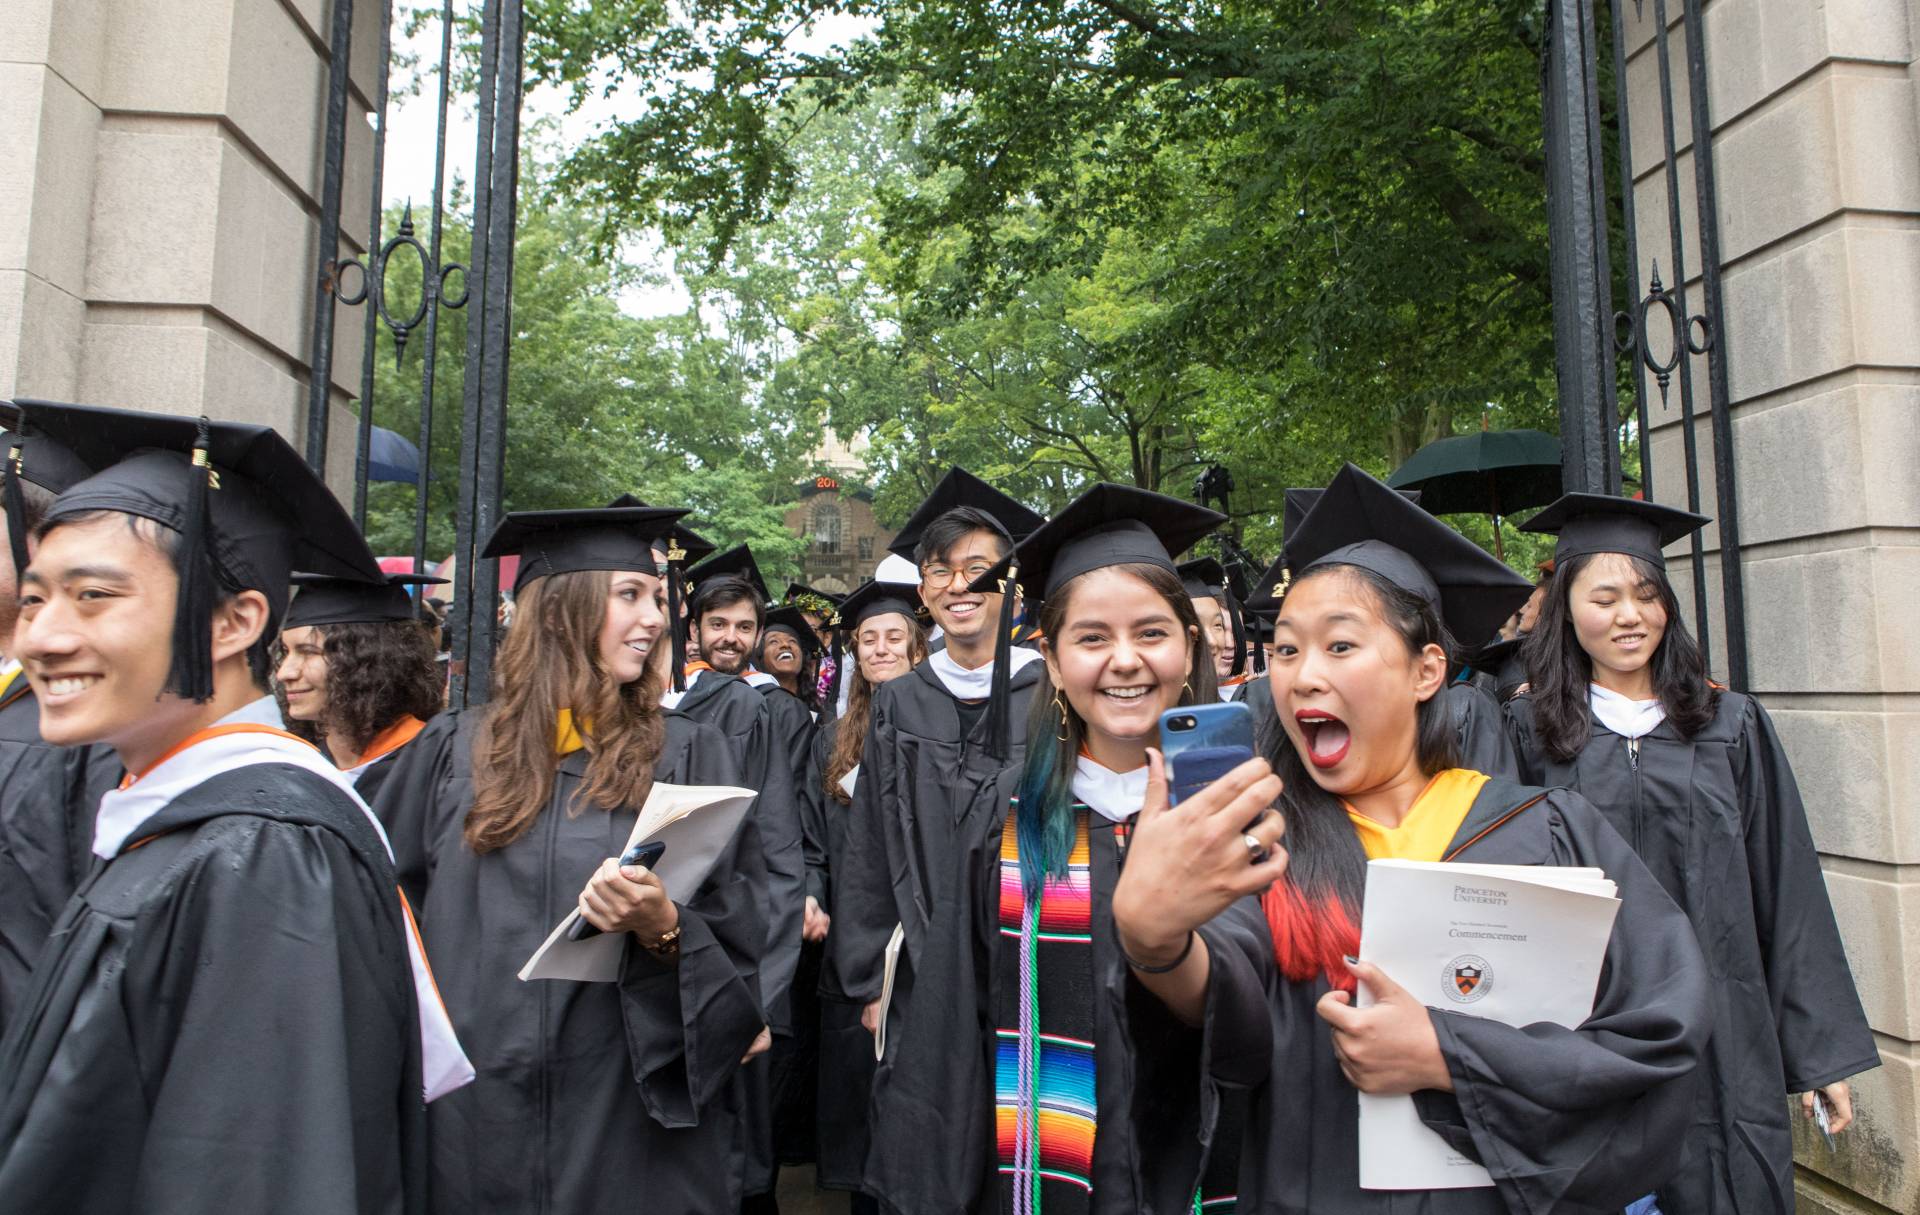 Students process through FitzRandolph Gate at Commencement 2017